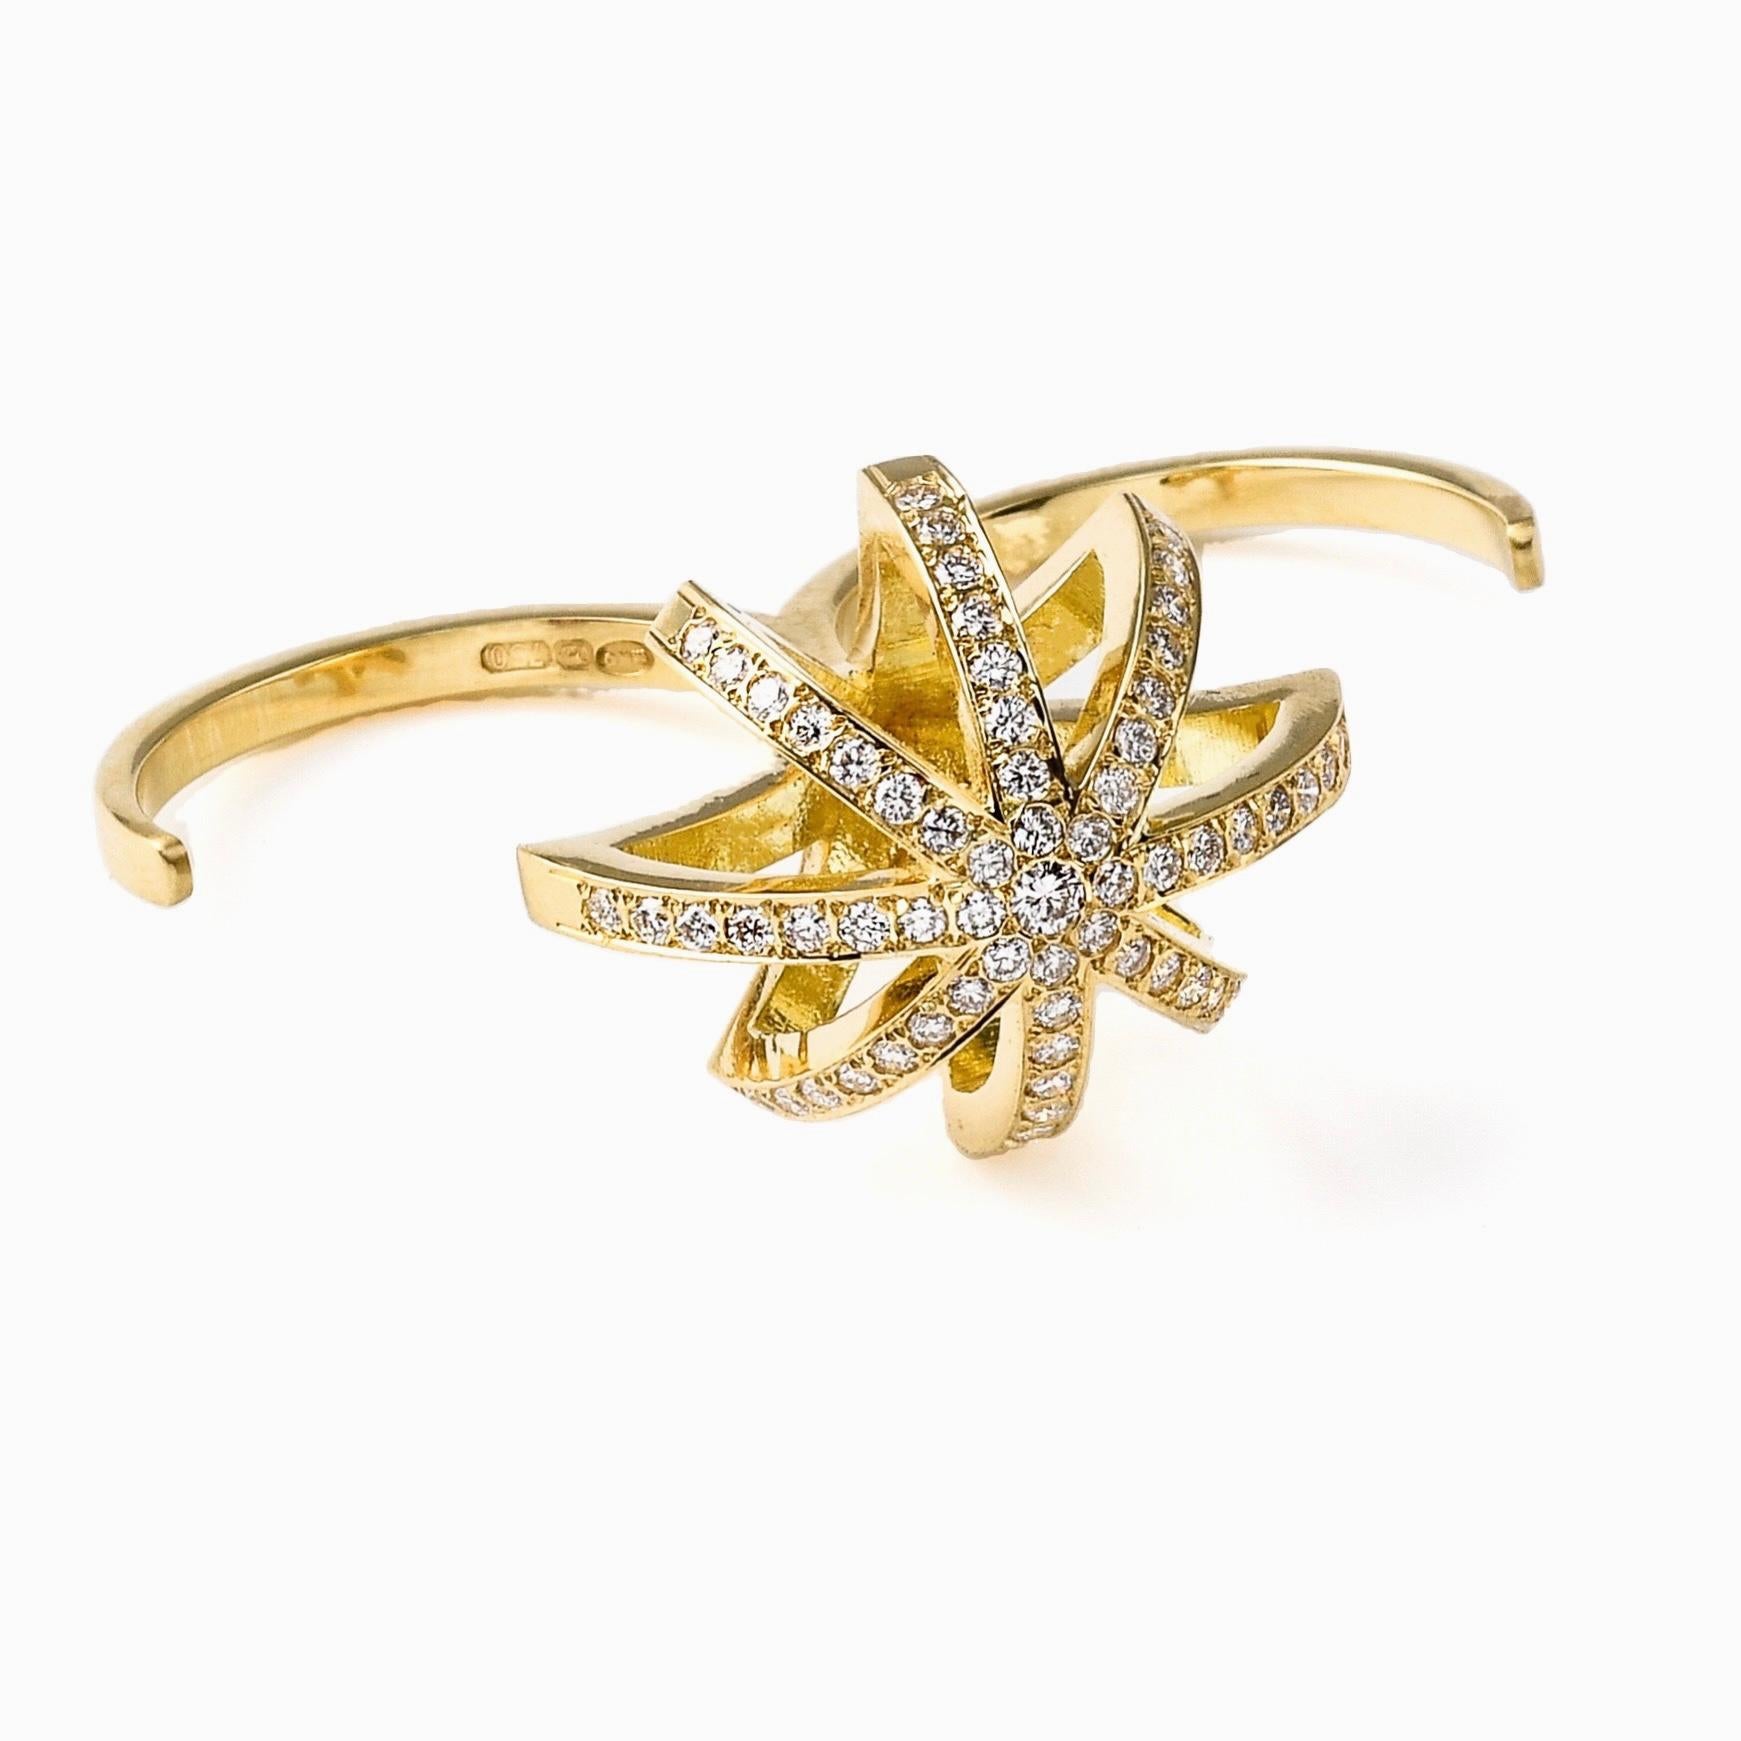 The ‘Reclining Star’, ring is crafted in 18K gold, hallmarked in Cyprus. It comes in a highly polished finish, set with White, VS Diamonds totaling 0,67 Cts. This impressive, two finger ring is specially designed to fit on two fingers comfortably,